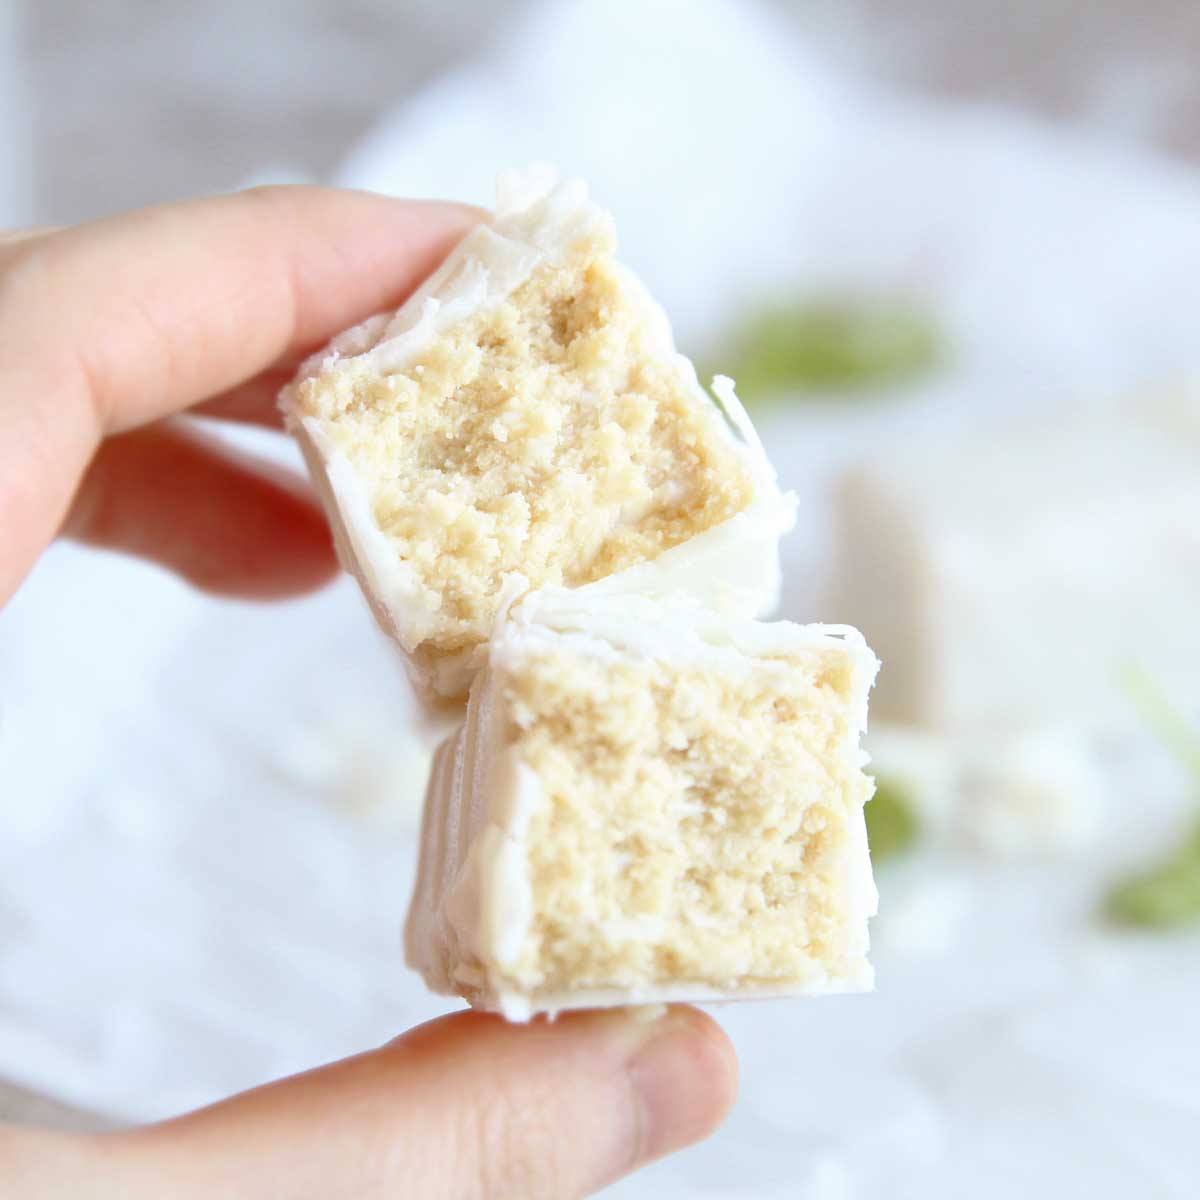 Healthy Homemade Lemon Protein Bars made with Collagen Peptides - Lemon Protein Bars